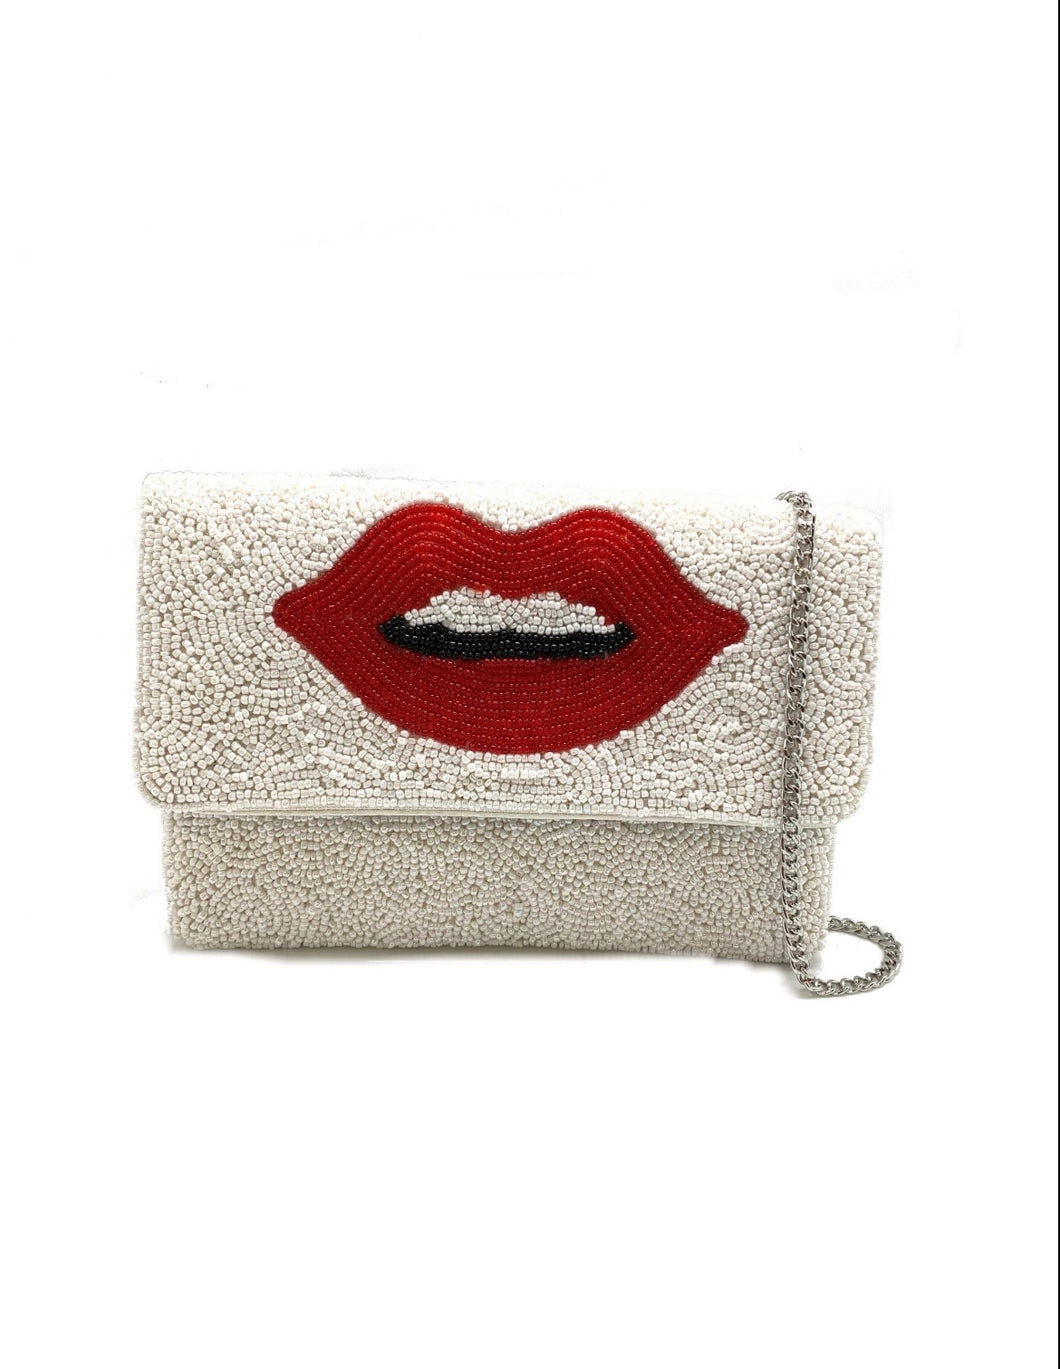 Red Lips Beaded Clutch in White